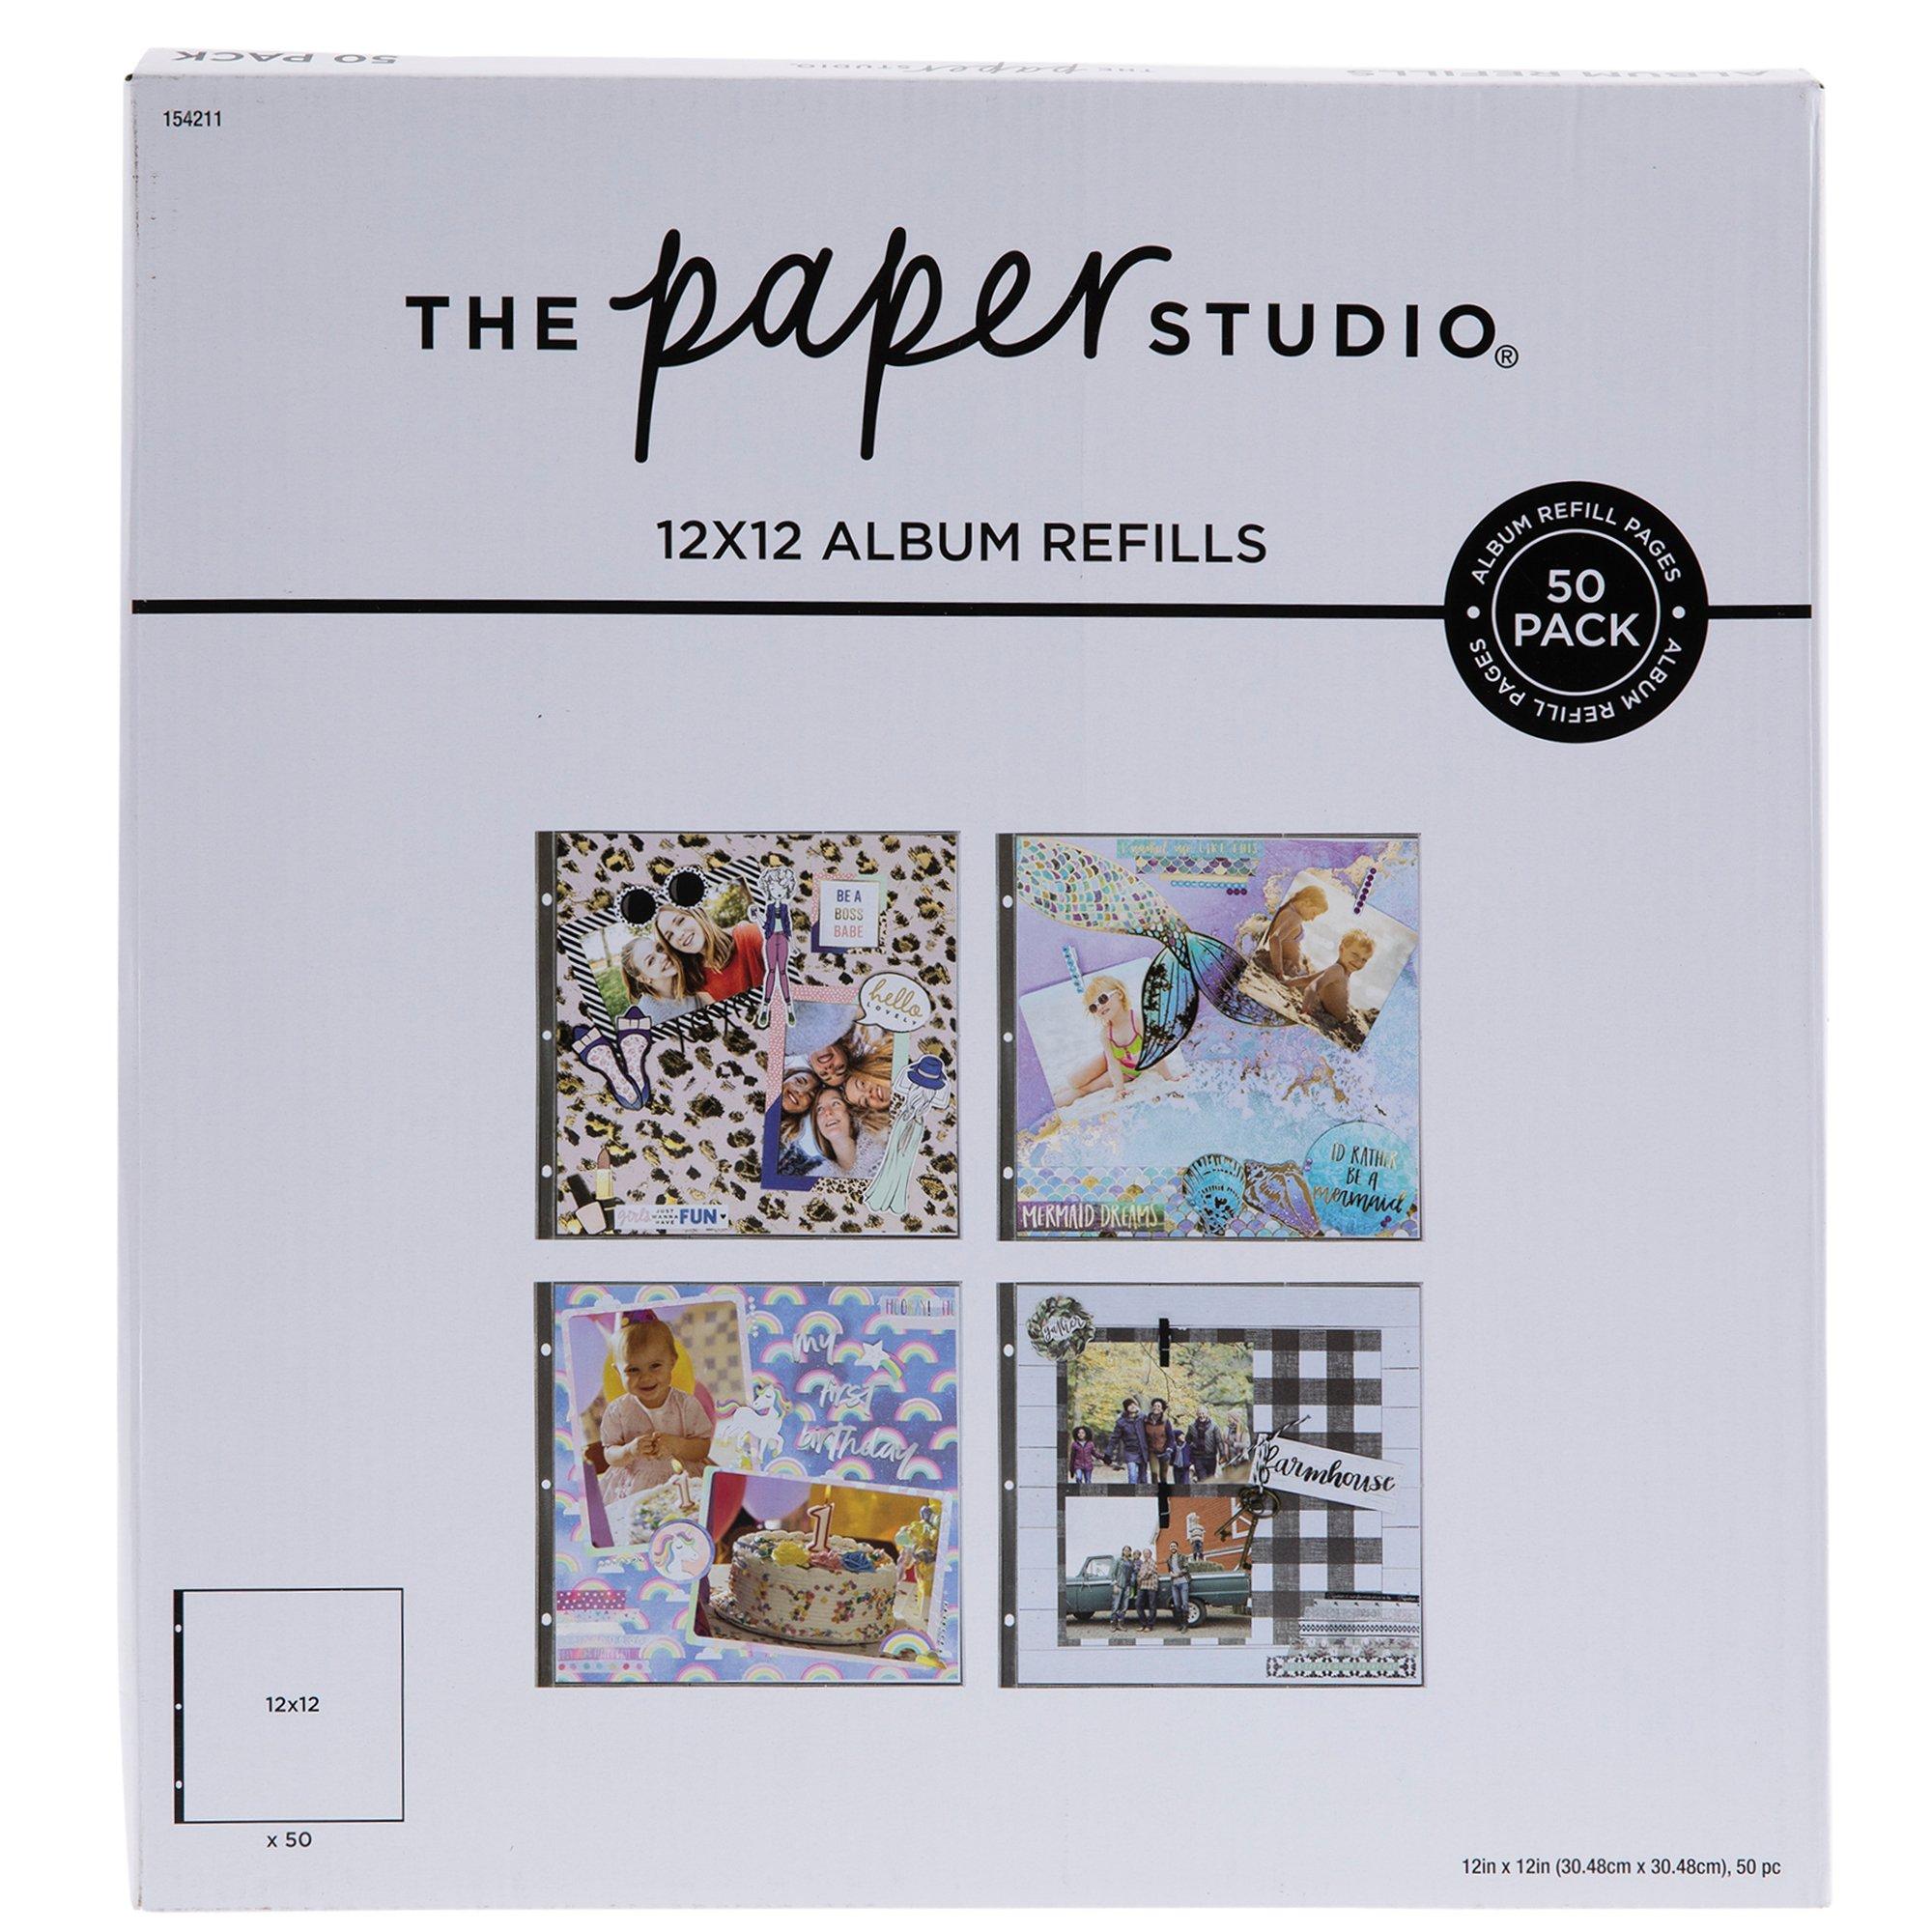  Dunwell Photo Album Refill Pages 12x12 - (4x6 Landscape, 10  Pack) Holds 120 4x6 Photos, 4x6 Photo Sleeves for 3 Ring Binder, D-Ring  Scrapbook Album 12x12, Archival Quality Page Protectors 12x12 